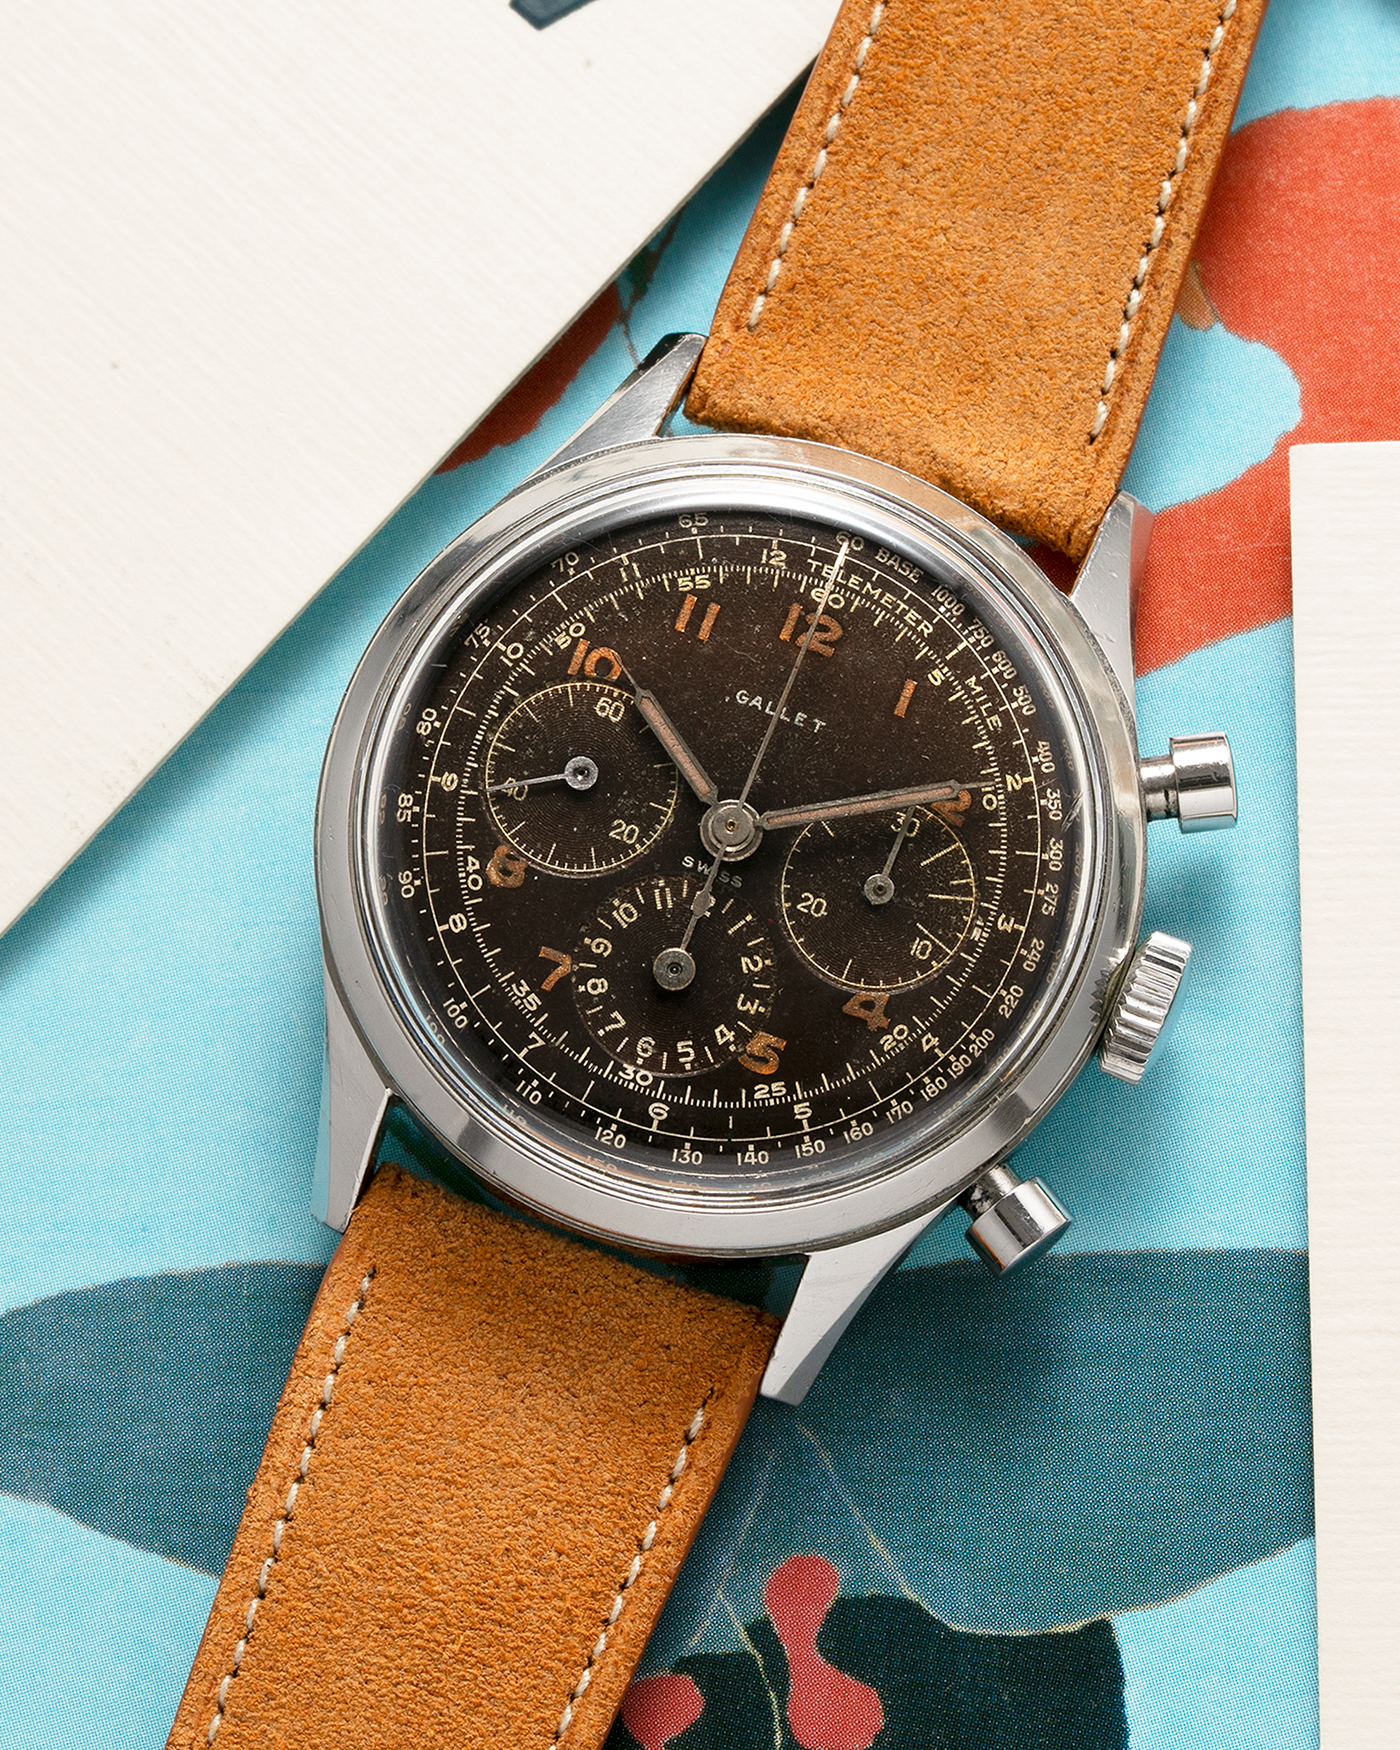 Brand: Gallet Year: 1950’s Model: Mutichron 12H Chronograph Serial Number: 933631 Material: Stainless Steel Movement: Excelsior Park 40, Manual-Winding Case Diameter: 37mm Strap: Nostime Sand Tan Suede Calf Leather Strap